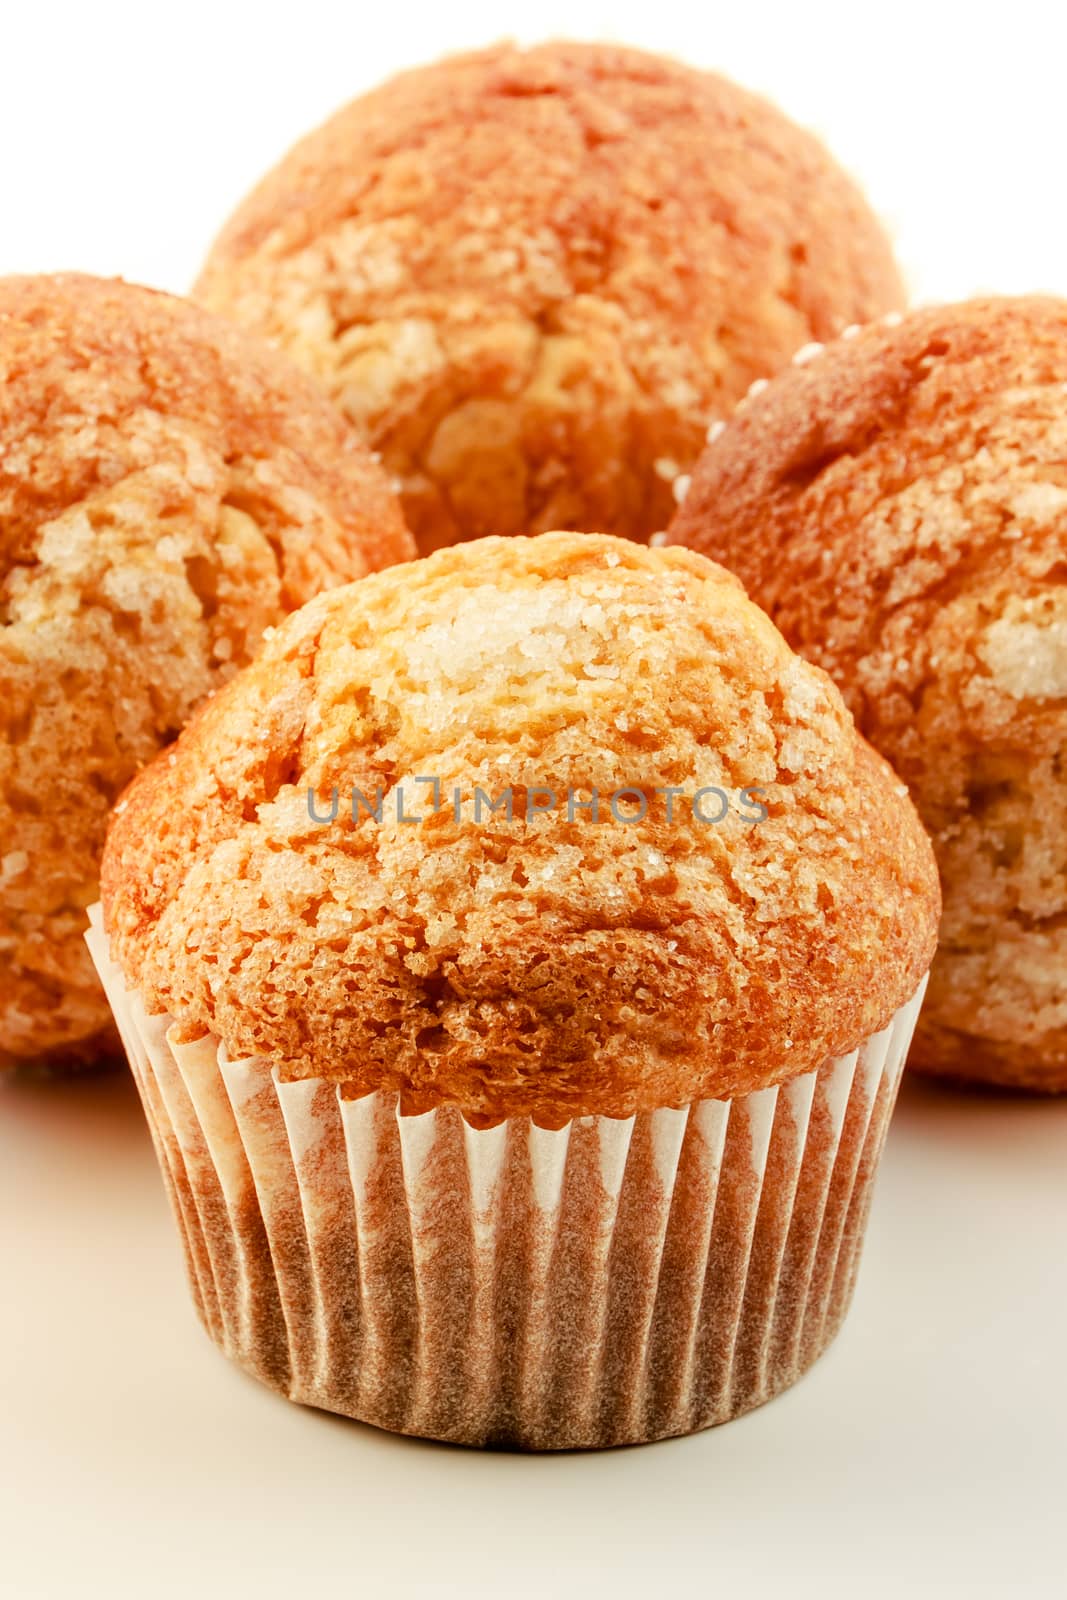 Homemade muffins on a white background. Vertical image.